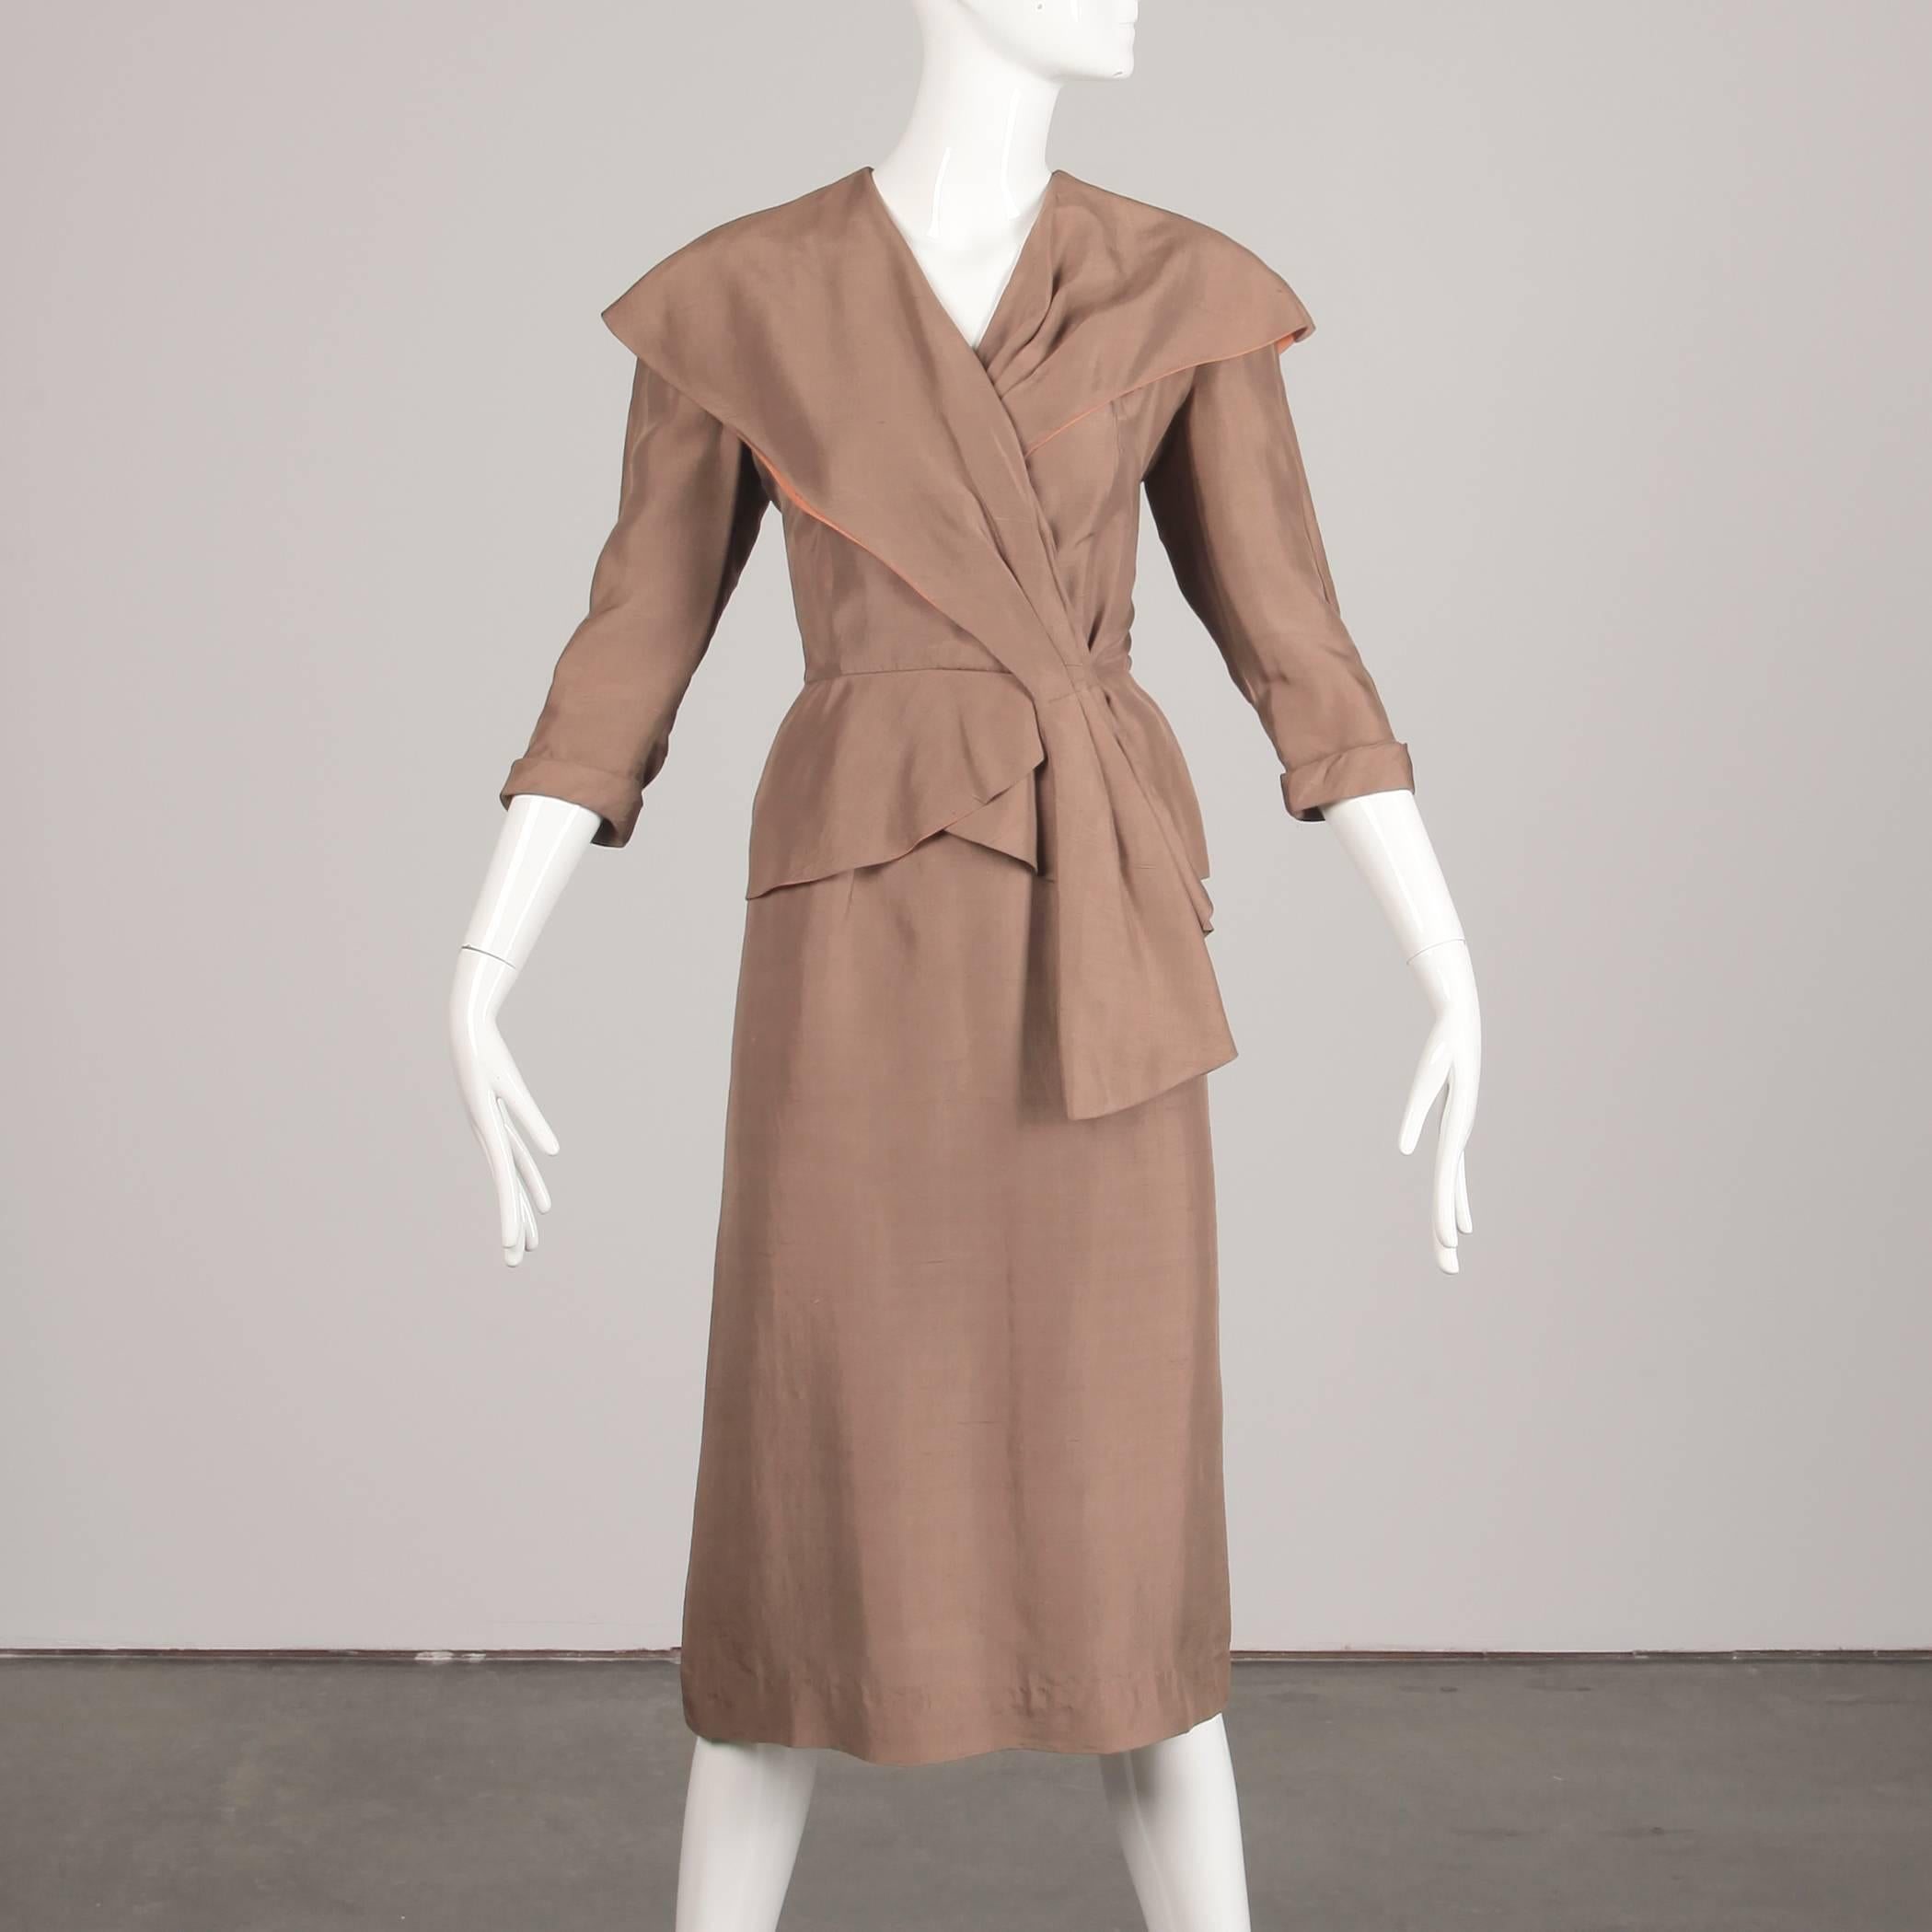 Asymmetric beige silk women's suit from the 1940s. The skirt is unlined with side metal zip and hook closure. 100% silk. Fits like a size small. The waist measures 25.75